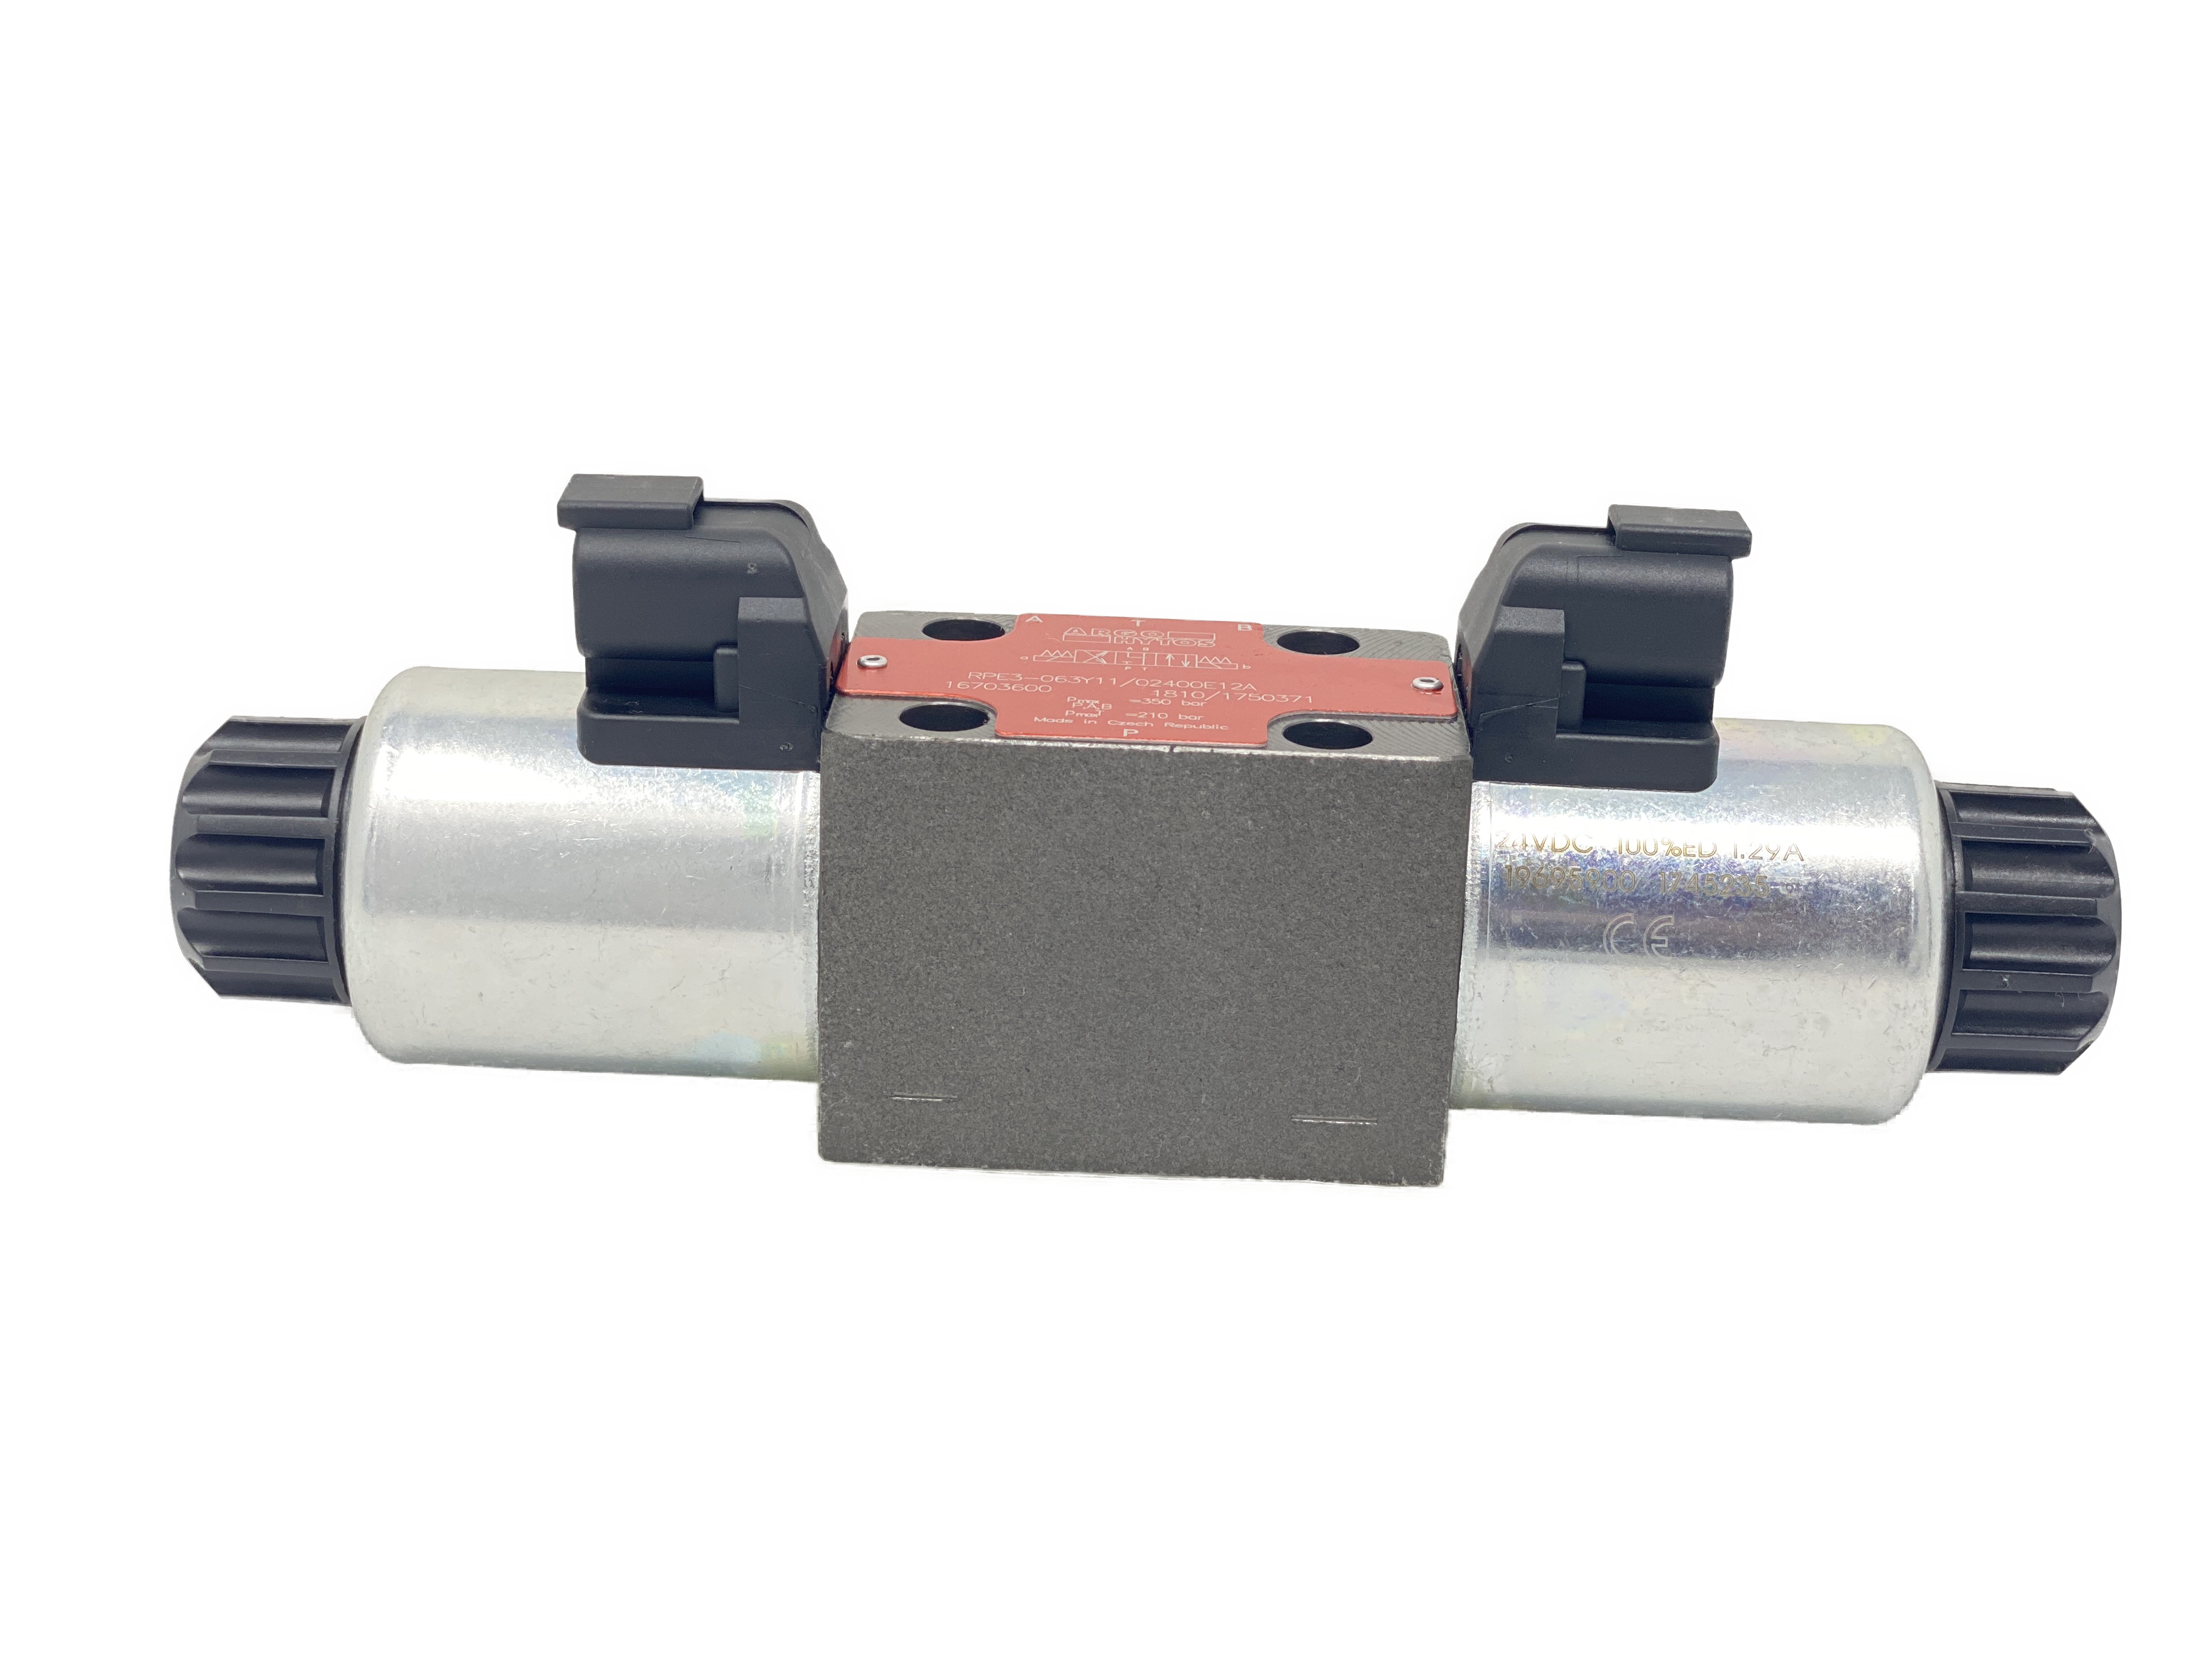 RPE3-063H11/02400E12A : Argo 3-position, 4-Way Solenoid Operated DCV, 21GPM, 5100psi Rated, Open in Neutral